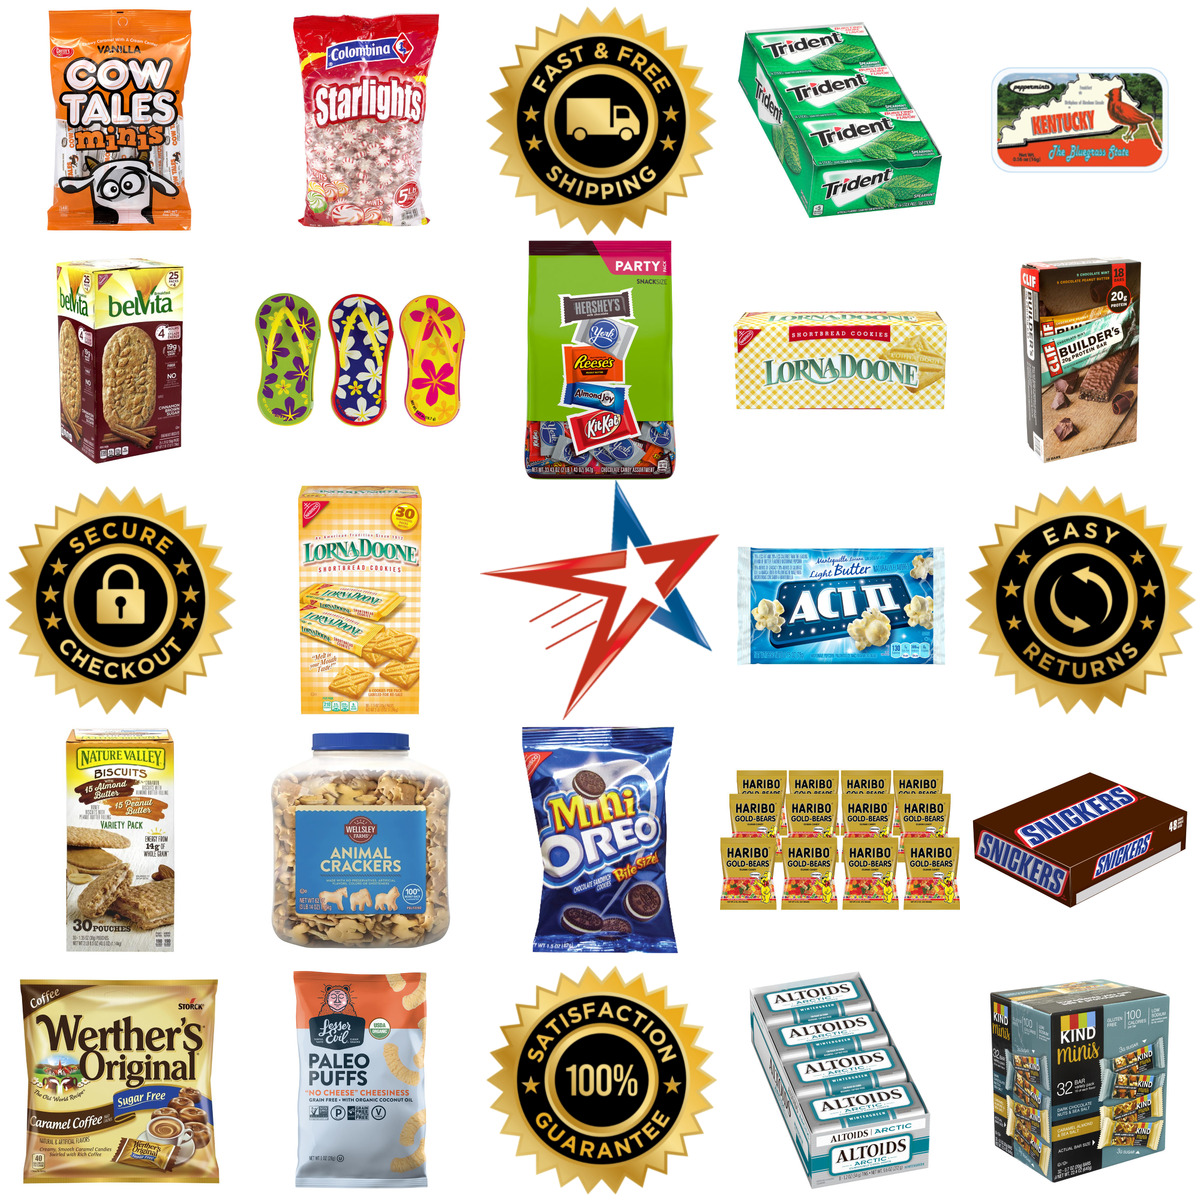 A selection of Candy and Snacks products on GoVets